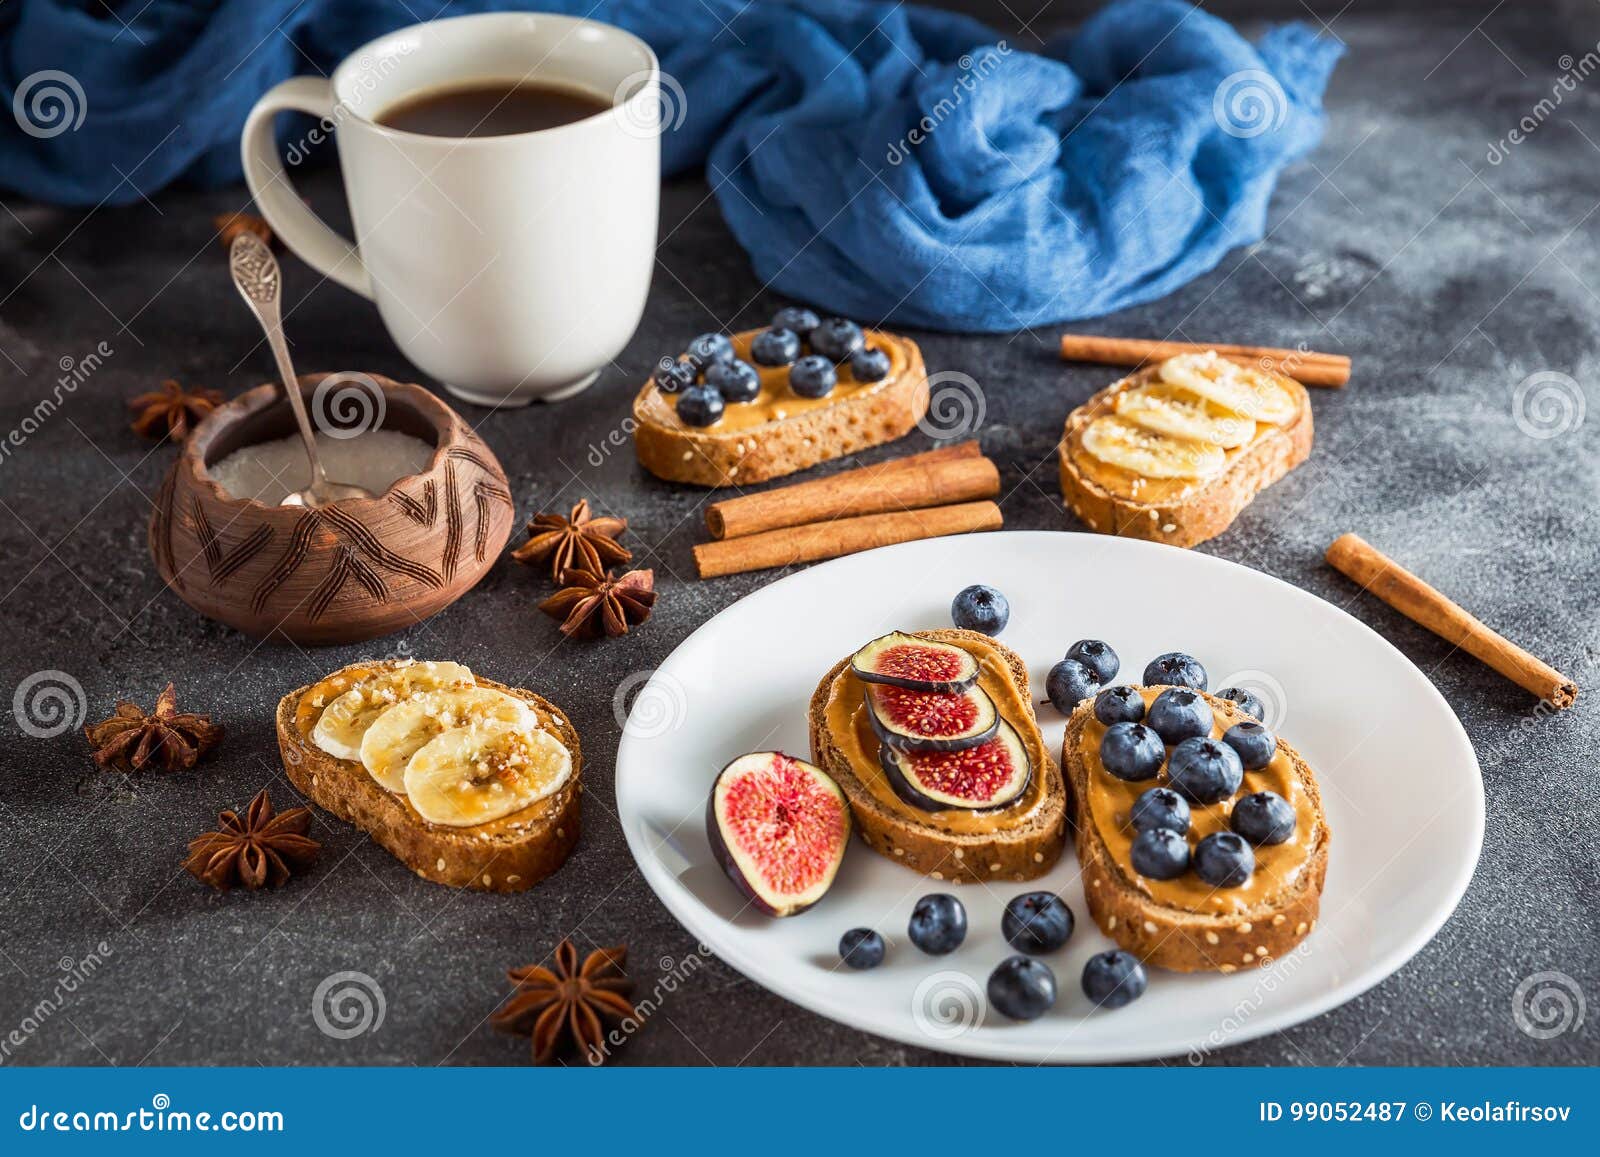 with Coffee and with Berries and Nuts Dark Table. Healthy Natural Dessert. Top View Stock Image - Image of bright, diet: